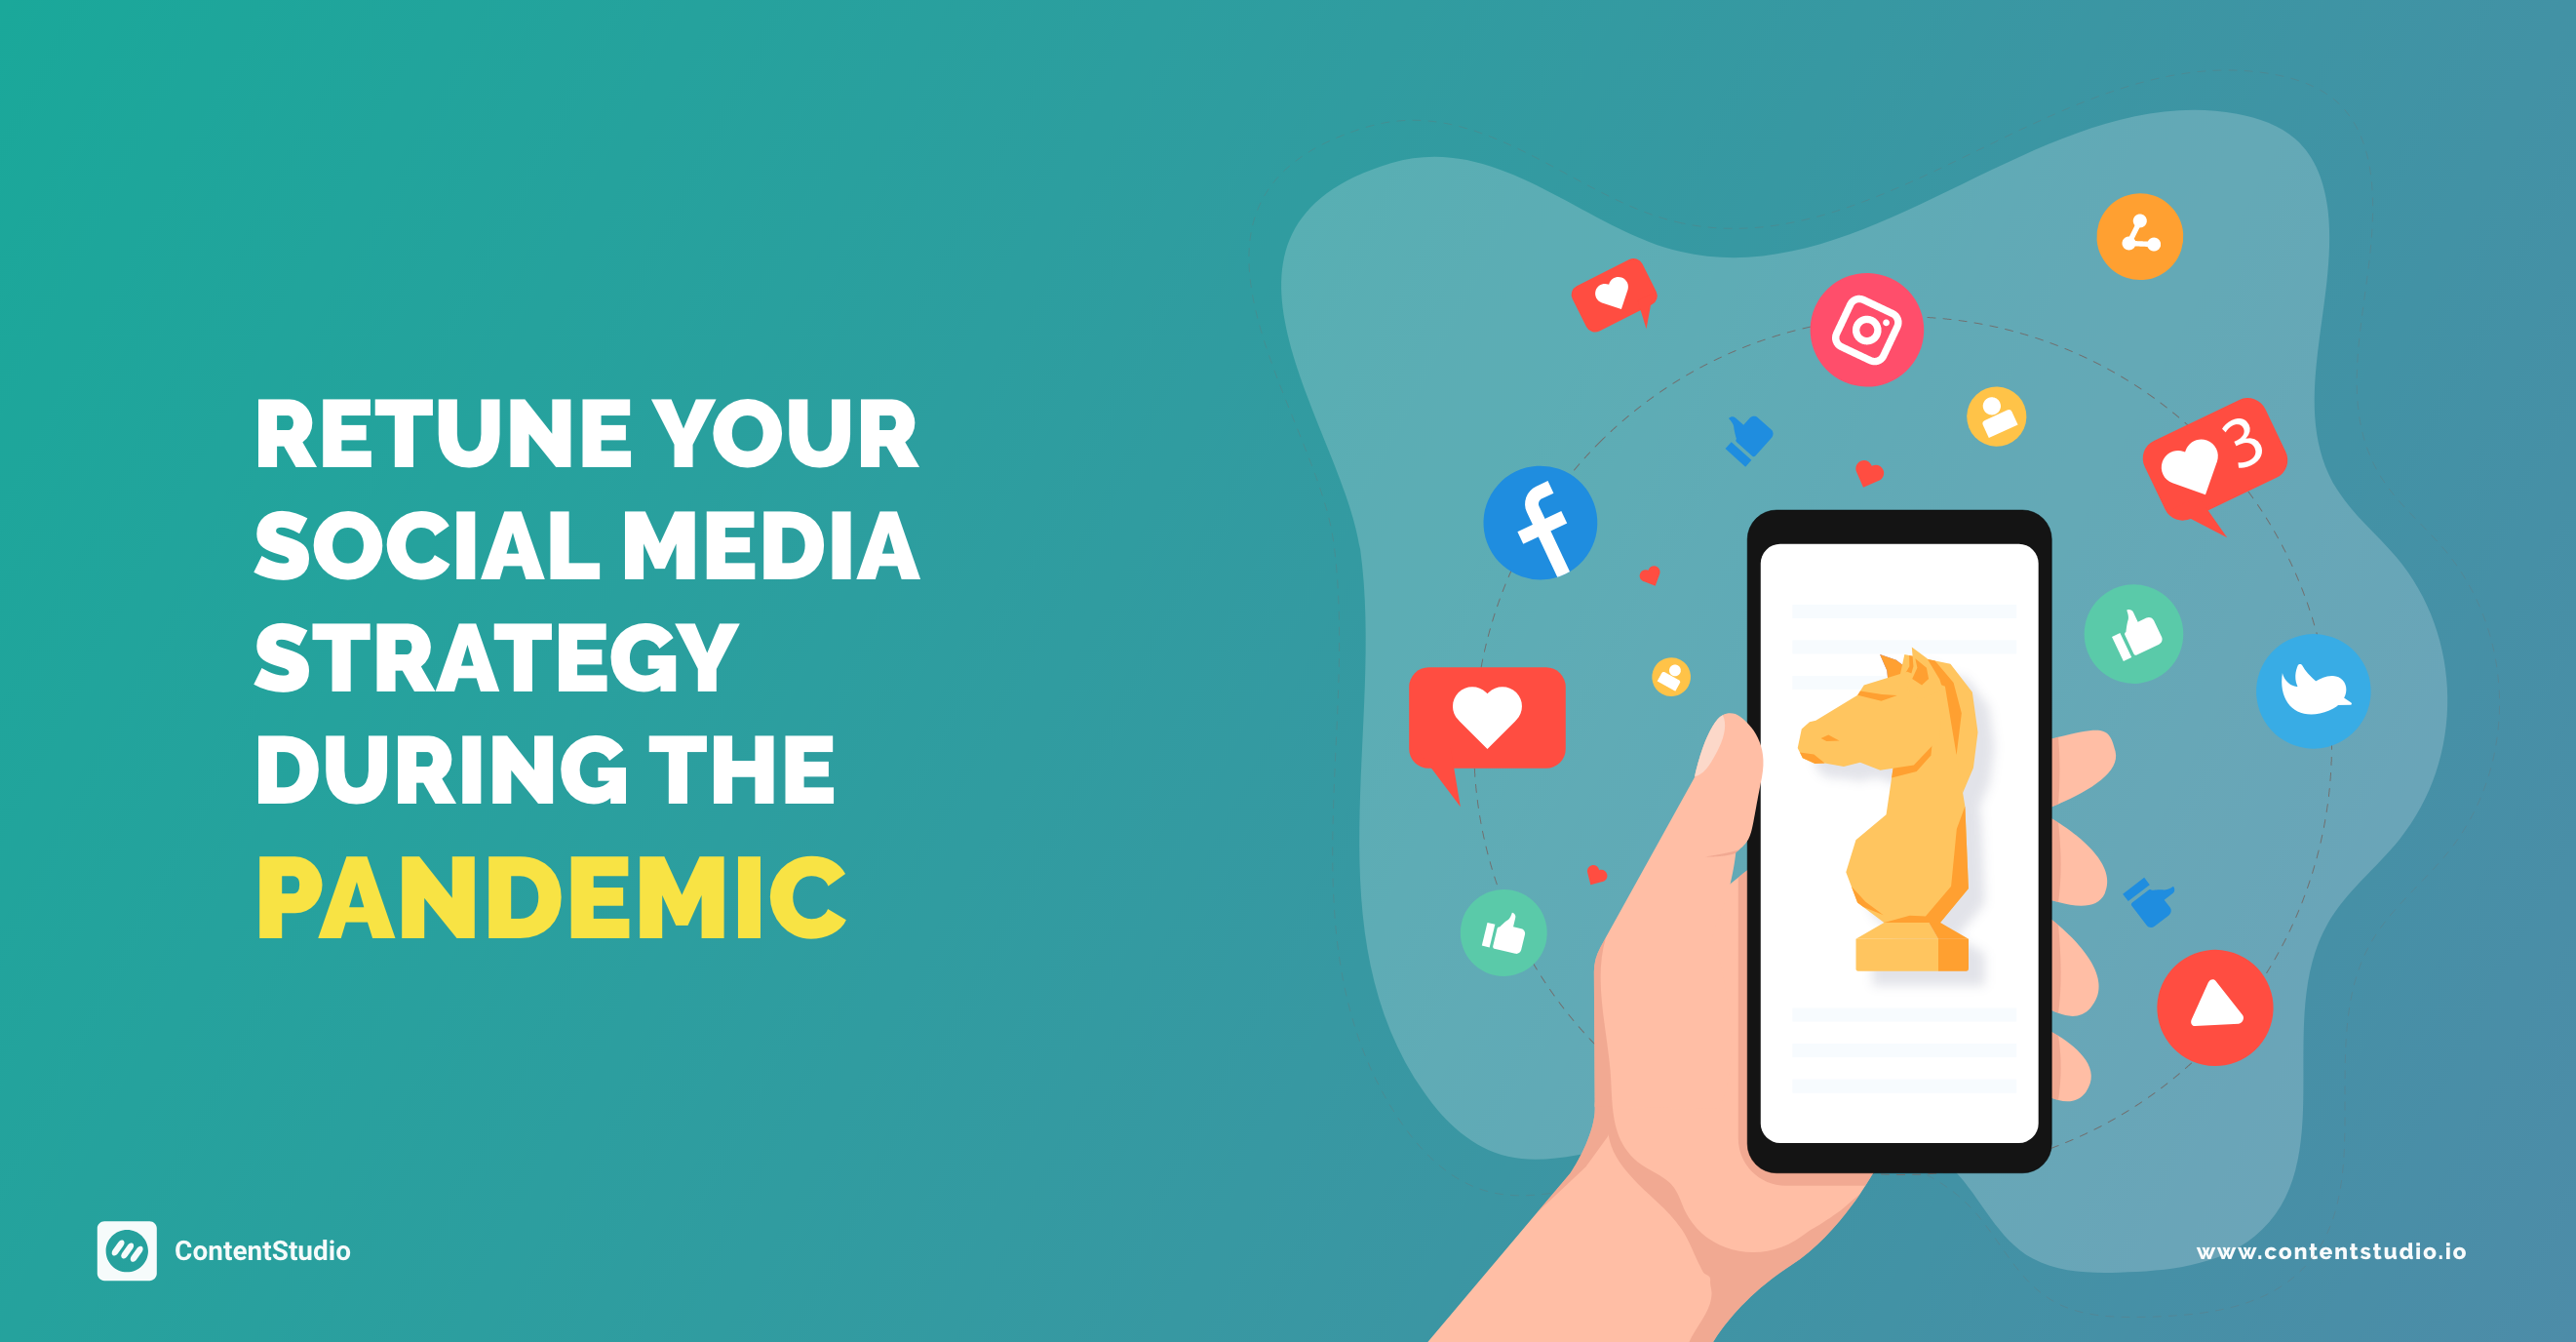 Retune Your Social Media Strategy During the Pandemic: Here’s What You Can Do